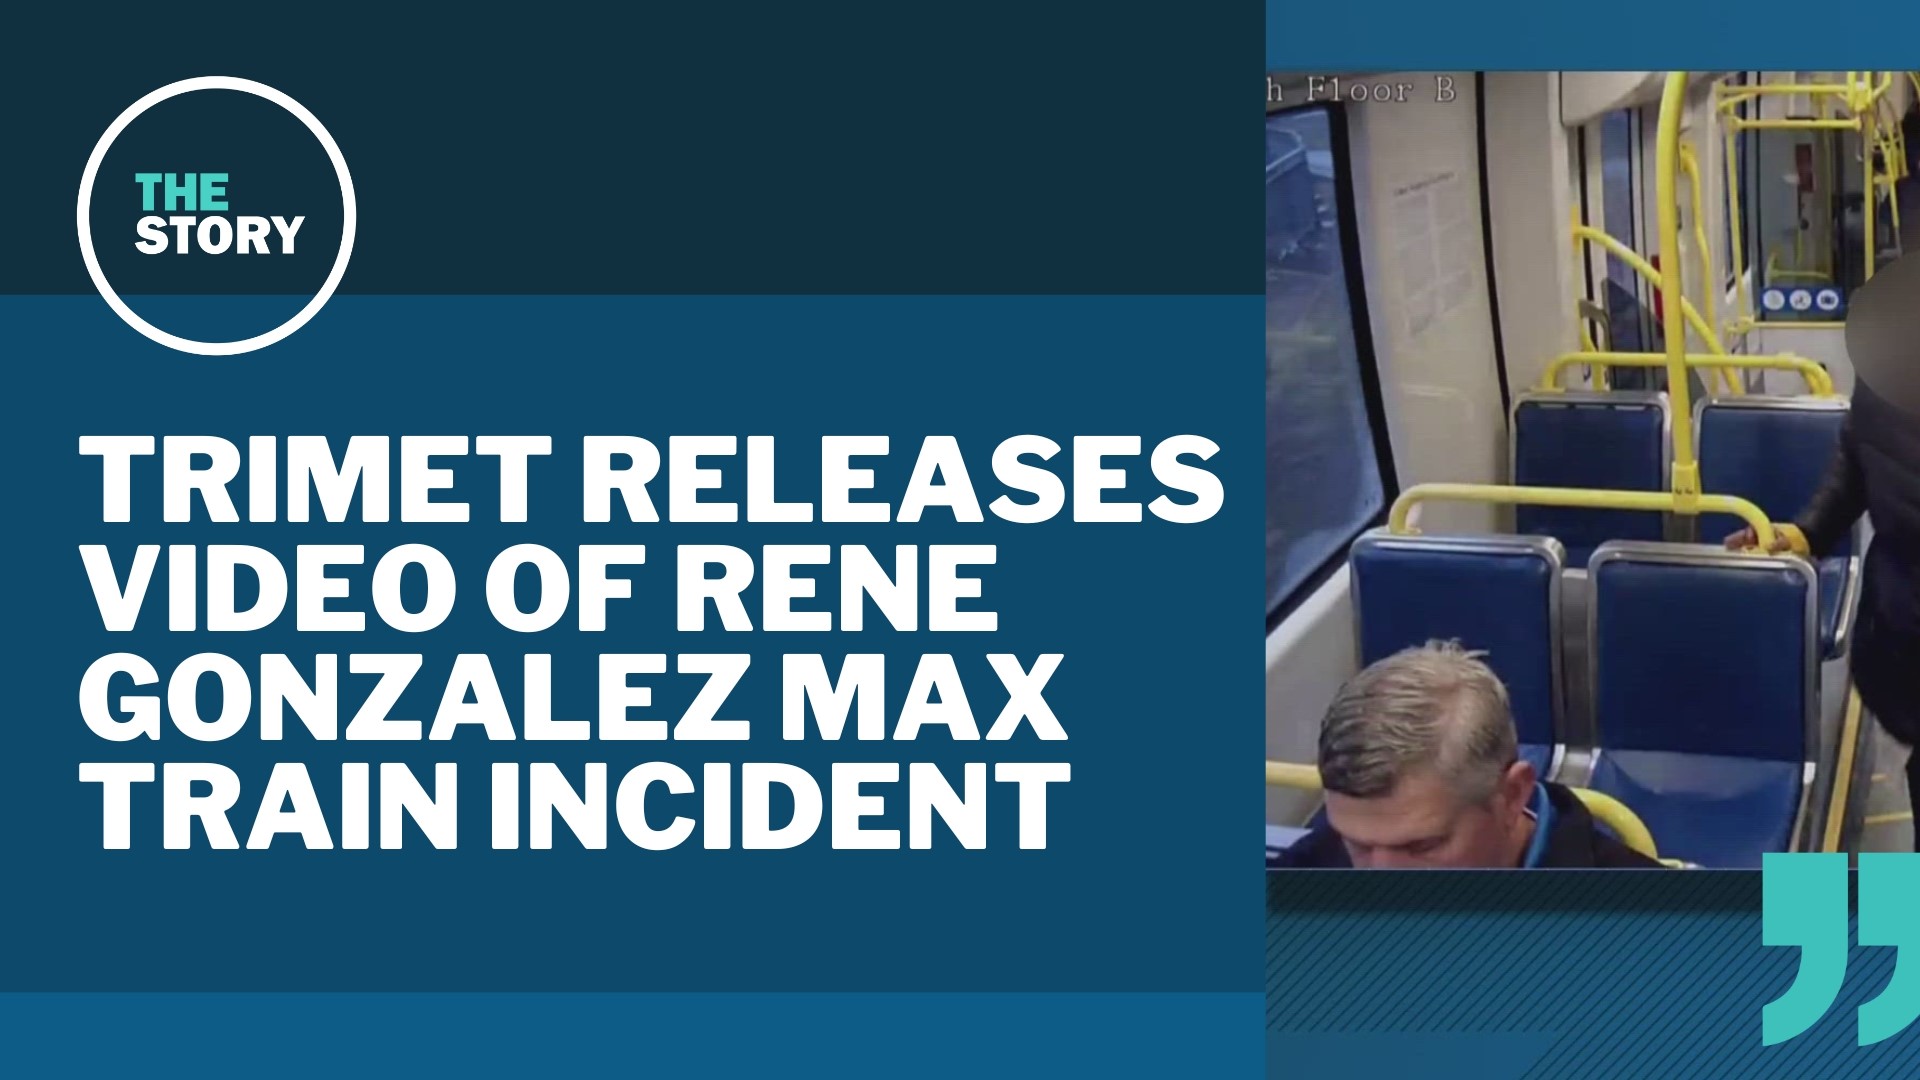 Portland Commissioner Rene Gonzalez recently said he would temporarily stop using public transit after he alleged a woman “accosted” him aboard a MAX Train.